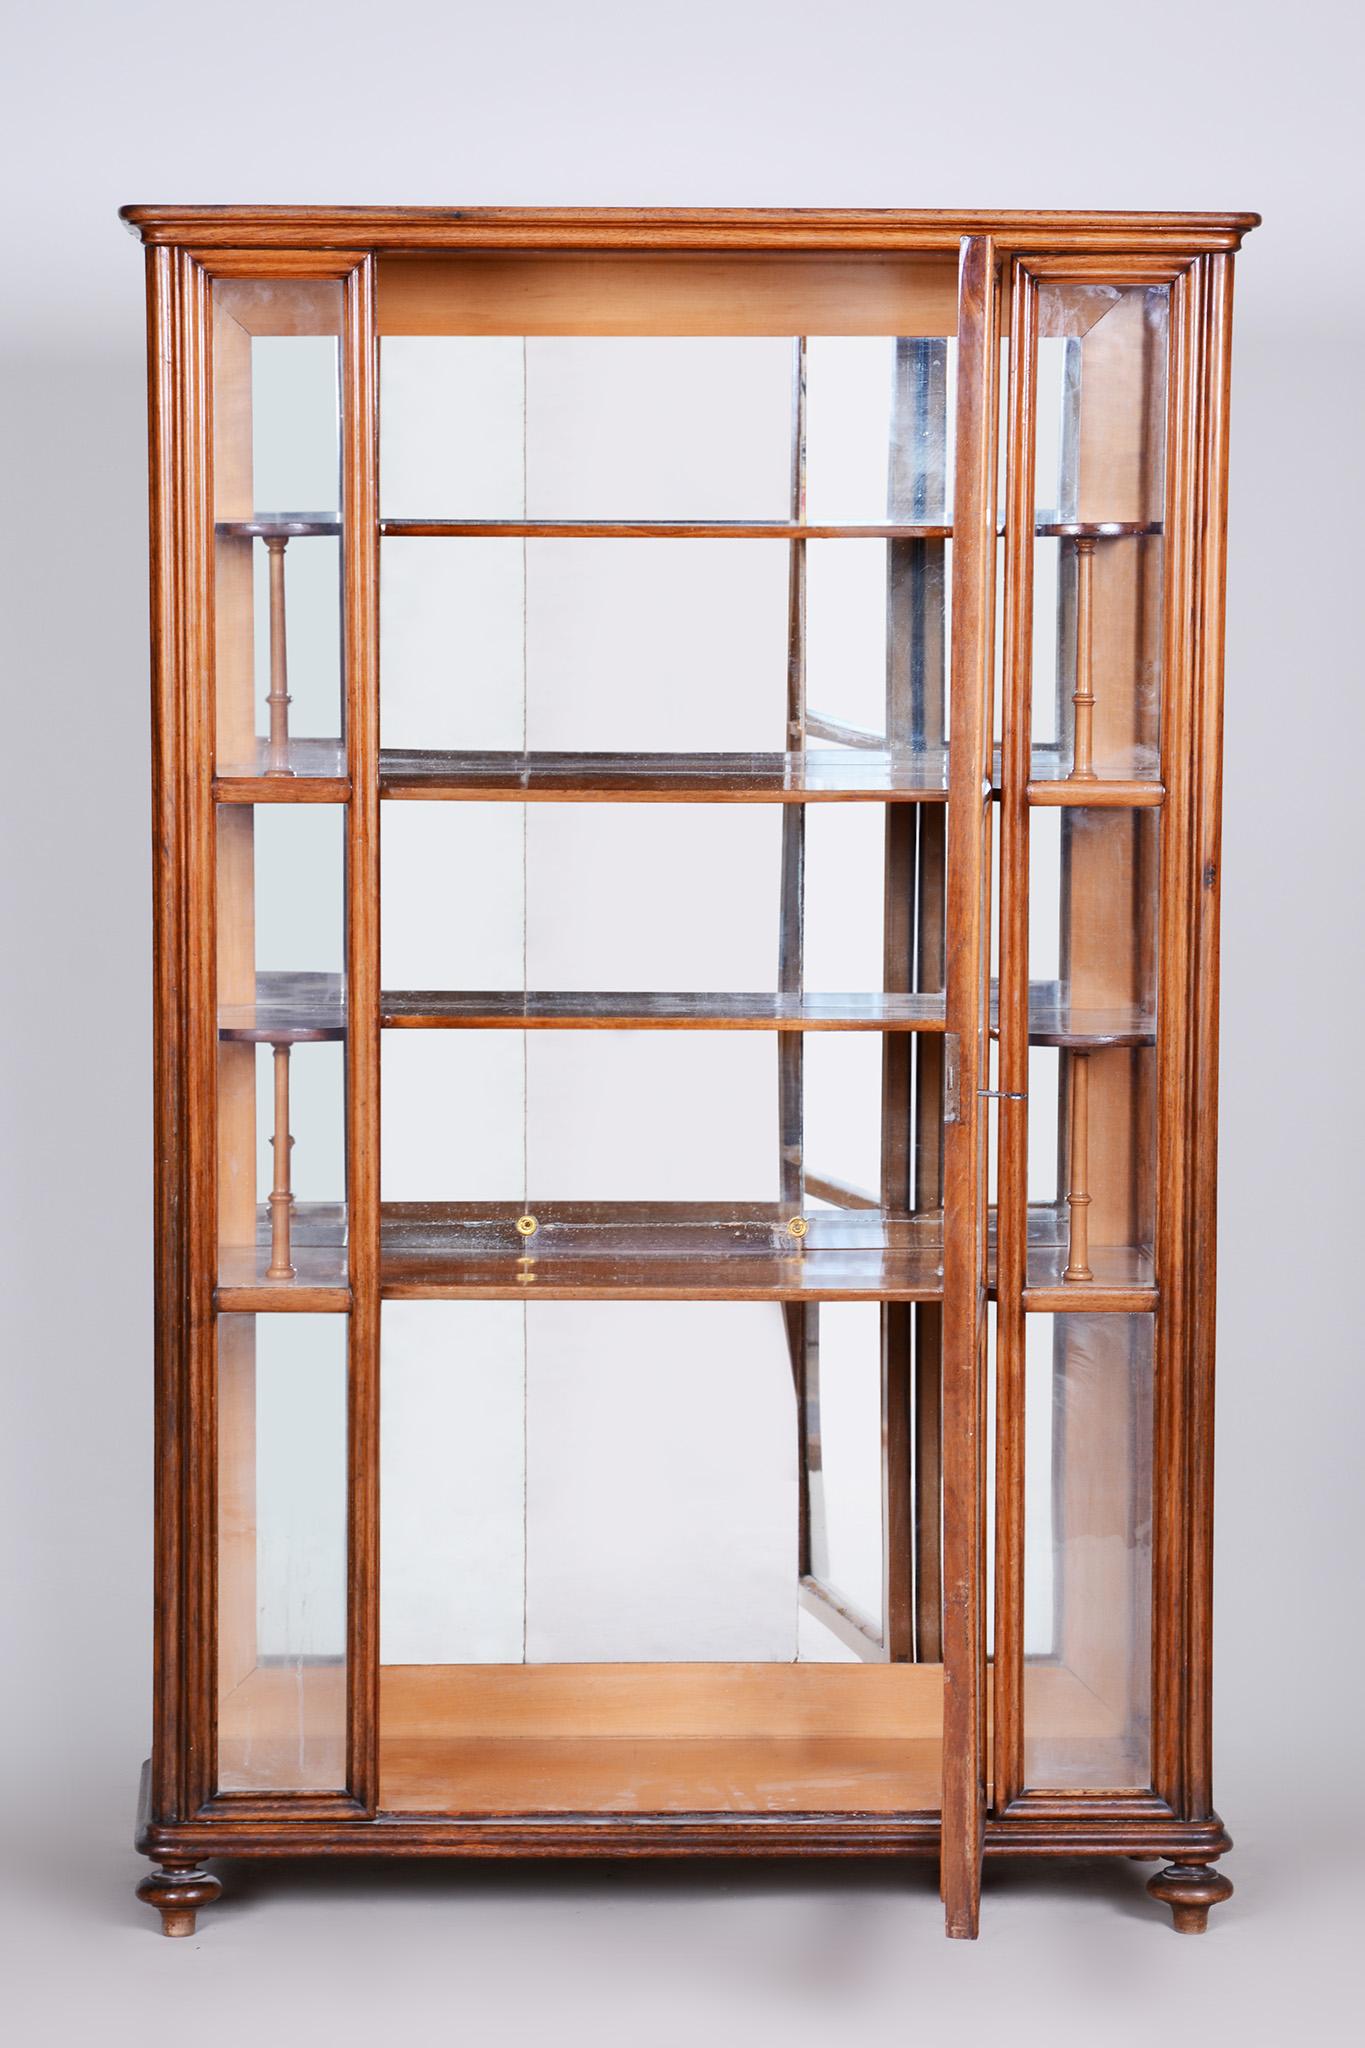 Wood 19th Century Display Cabinet Made in Bohemia, Fully Restored Walnut and Glass For Sale